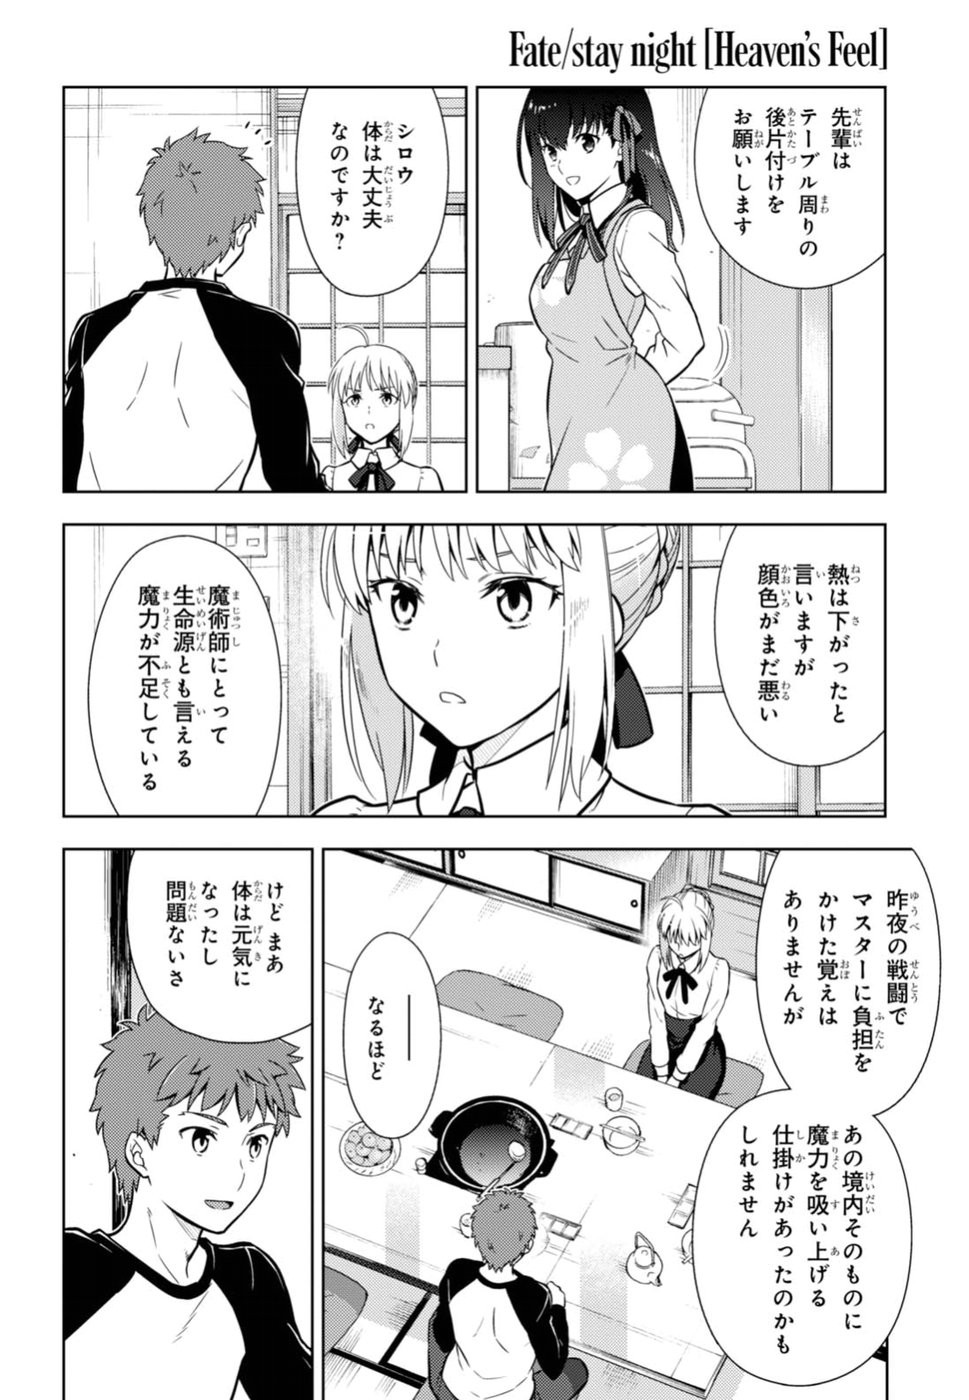 Fate/Stay night Heaven's Feel - Chapter 34 - Page 2